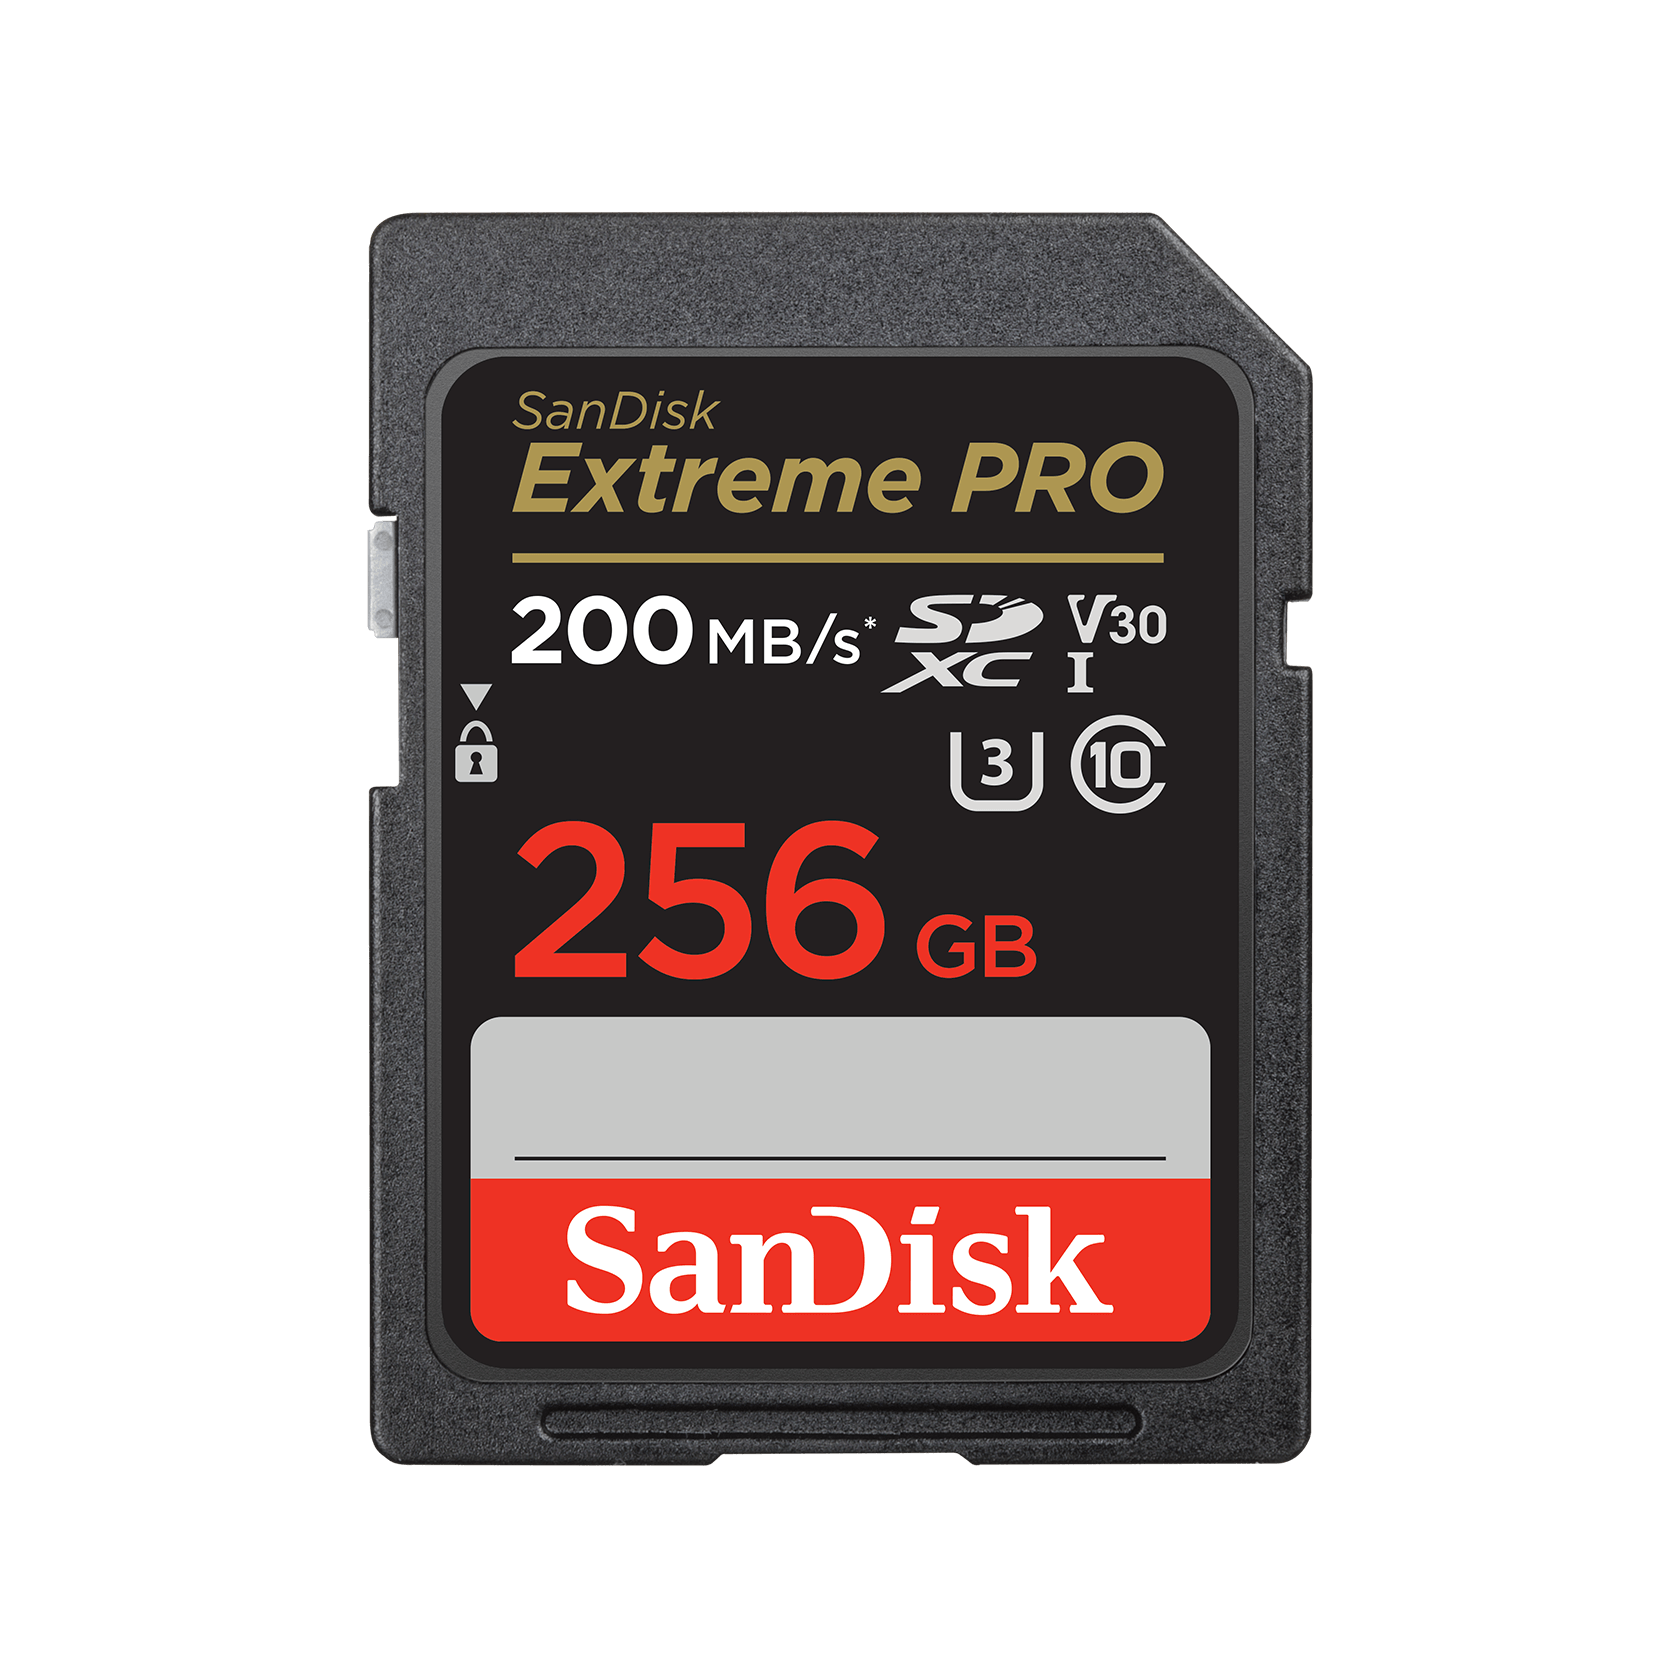 SanDisk Extreme PRO® SDHC™ And SDXC™ UHS-I Card - 256GB - SDSDXXD-256G-GN4IN